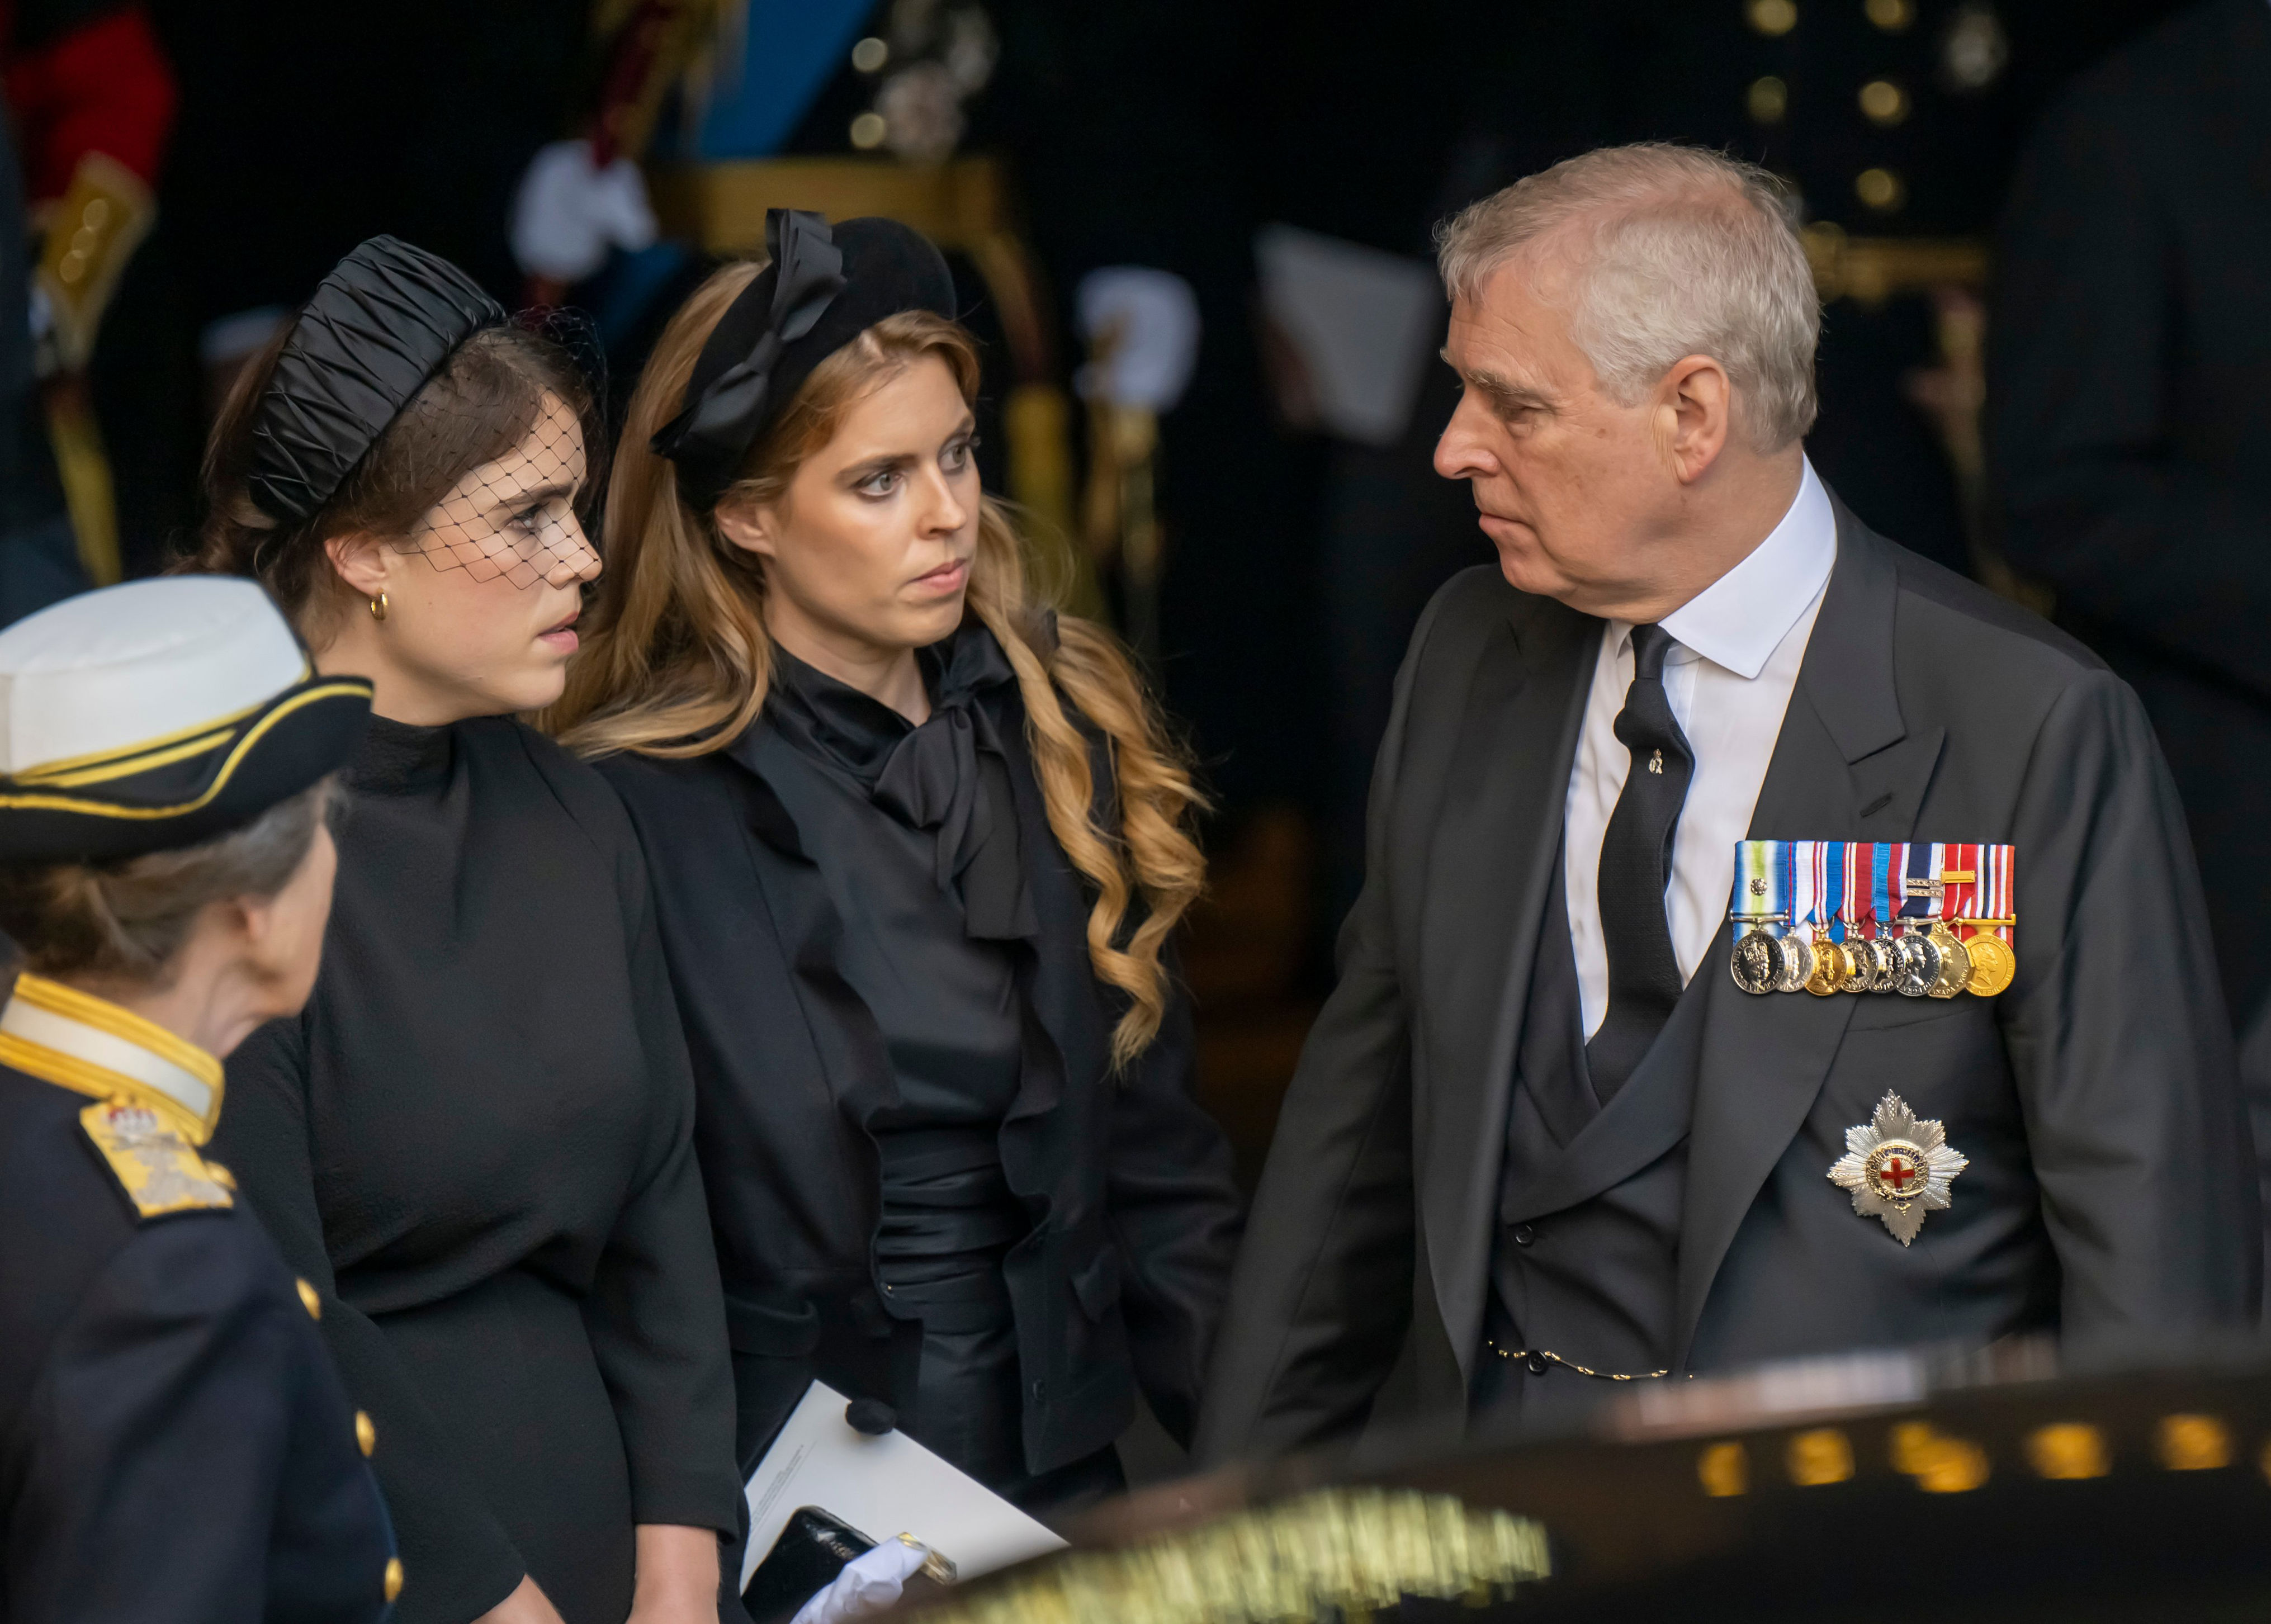 <p>Princess Eugenie and Princess Beatrice spoke to their father, Prince Andrew, at the Palace of Westminster in London on Sept. 14, 2022, after Queen Elizabeth II's coffin arrived from Buckingham Palace to begin her lying-in-state five days ahead of her funeral.</p>